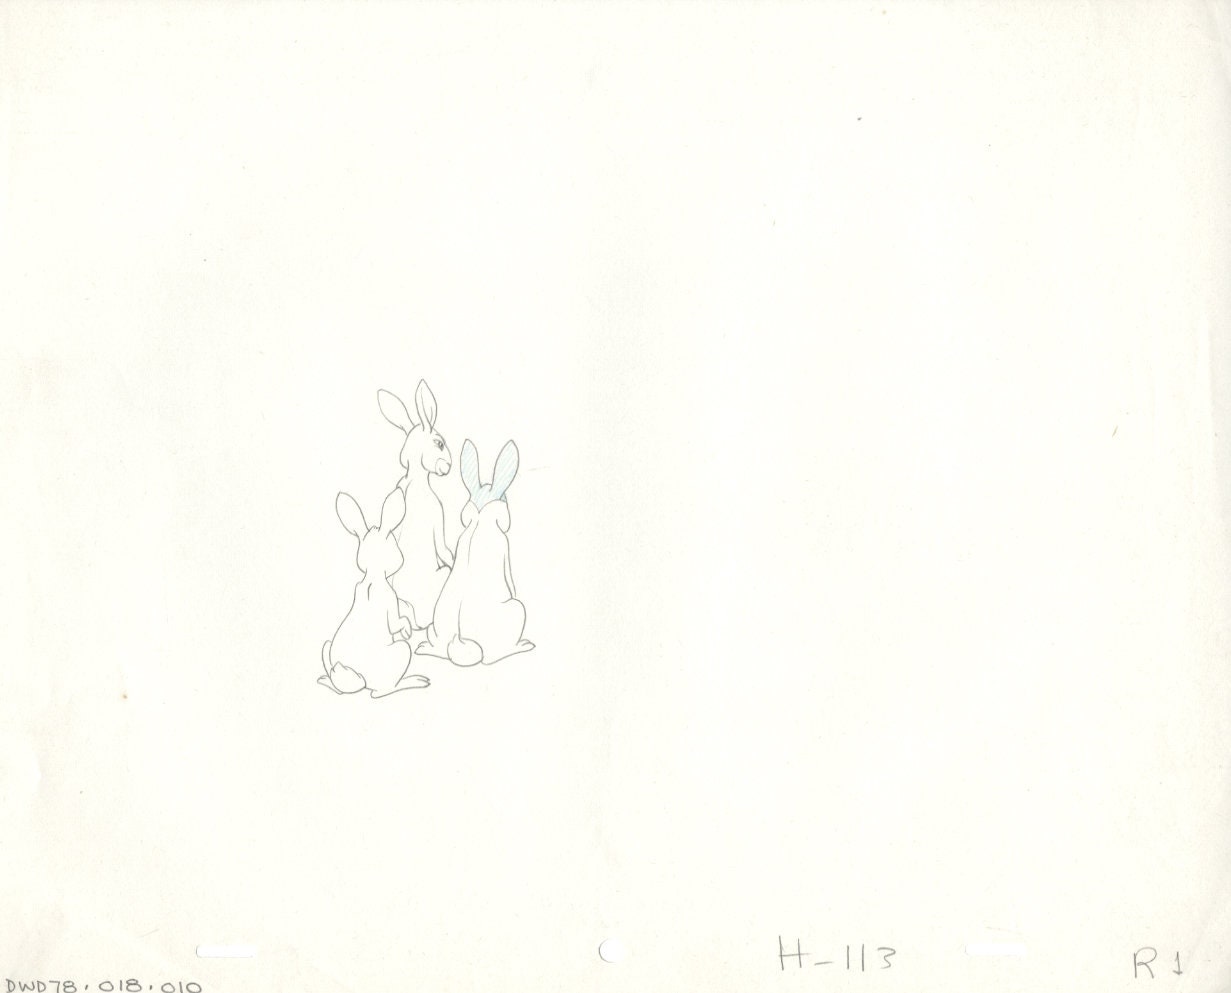 Watership Down 1978 Production Animation Cel Drawing with Linda Jones Enterprise Seal and Certificate of Authenticity 018-10